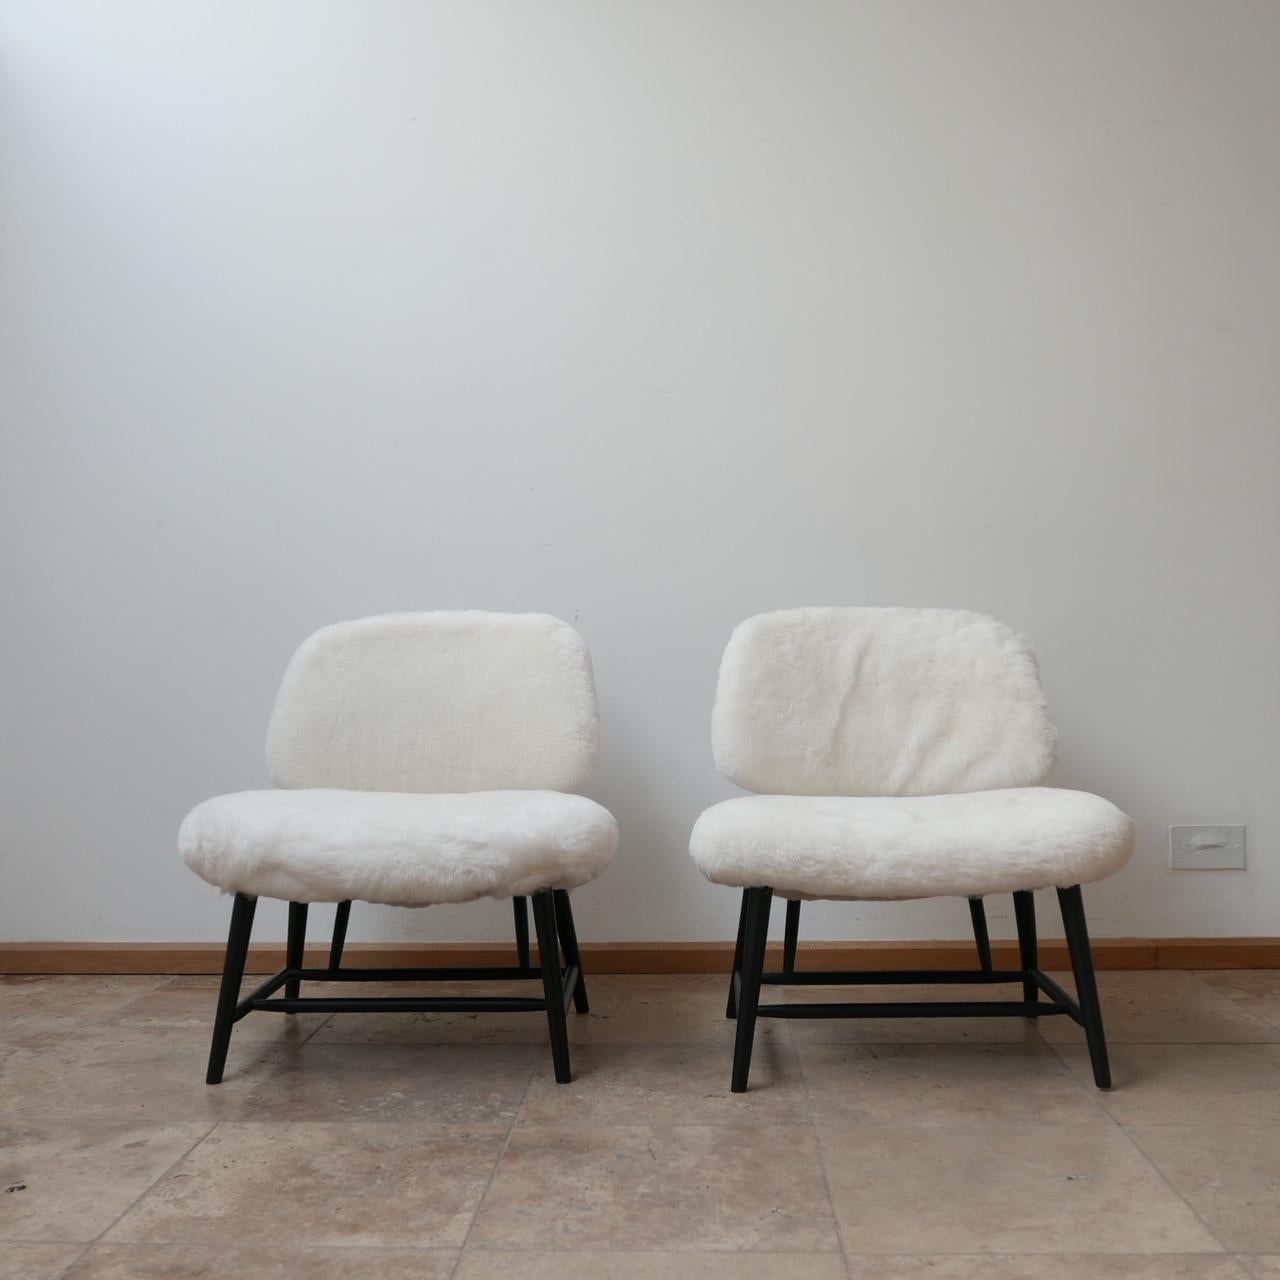 Pair of Alf Svensson 'TeVe' Sheepskin Shearling Lounge Chairs For Sale 1